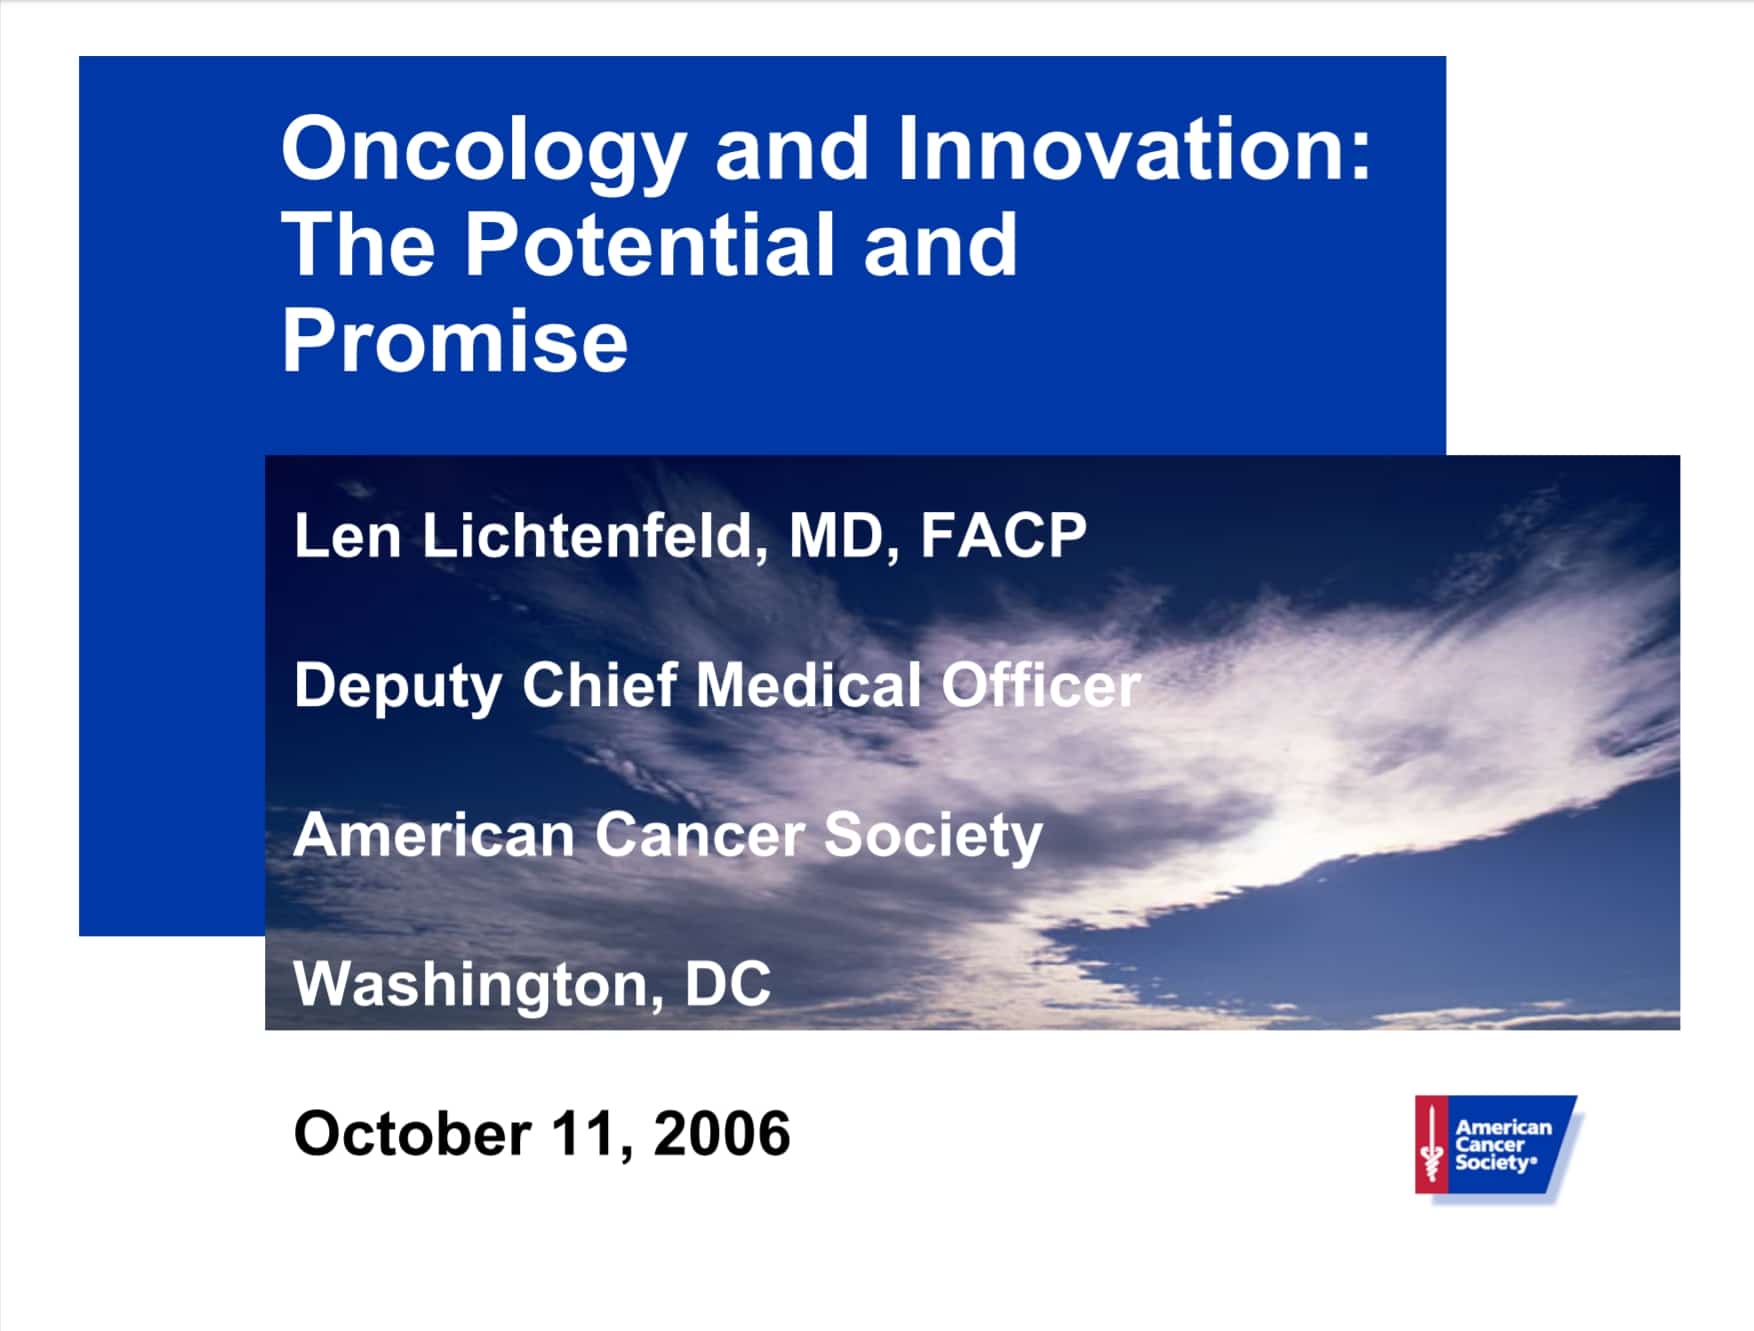 "Oncology and Innovation" presentation cover.